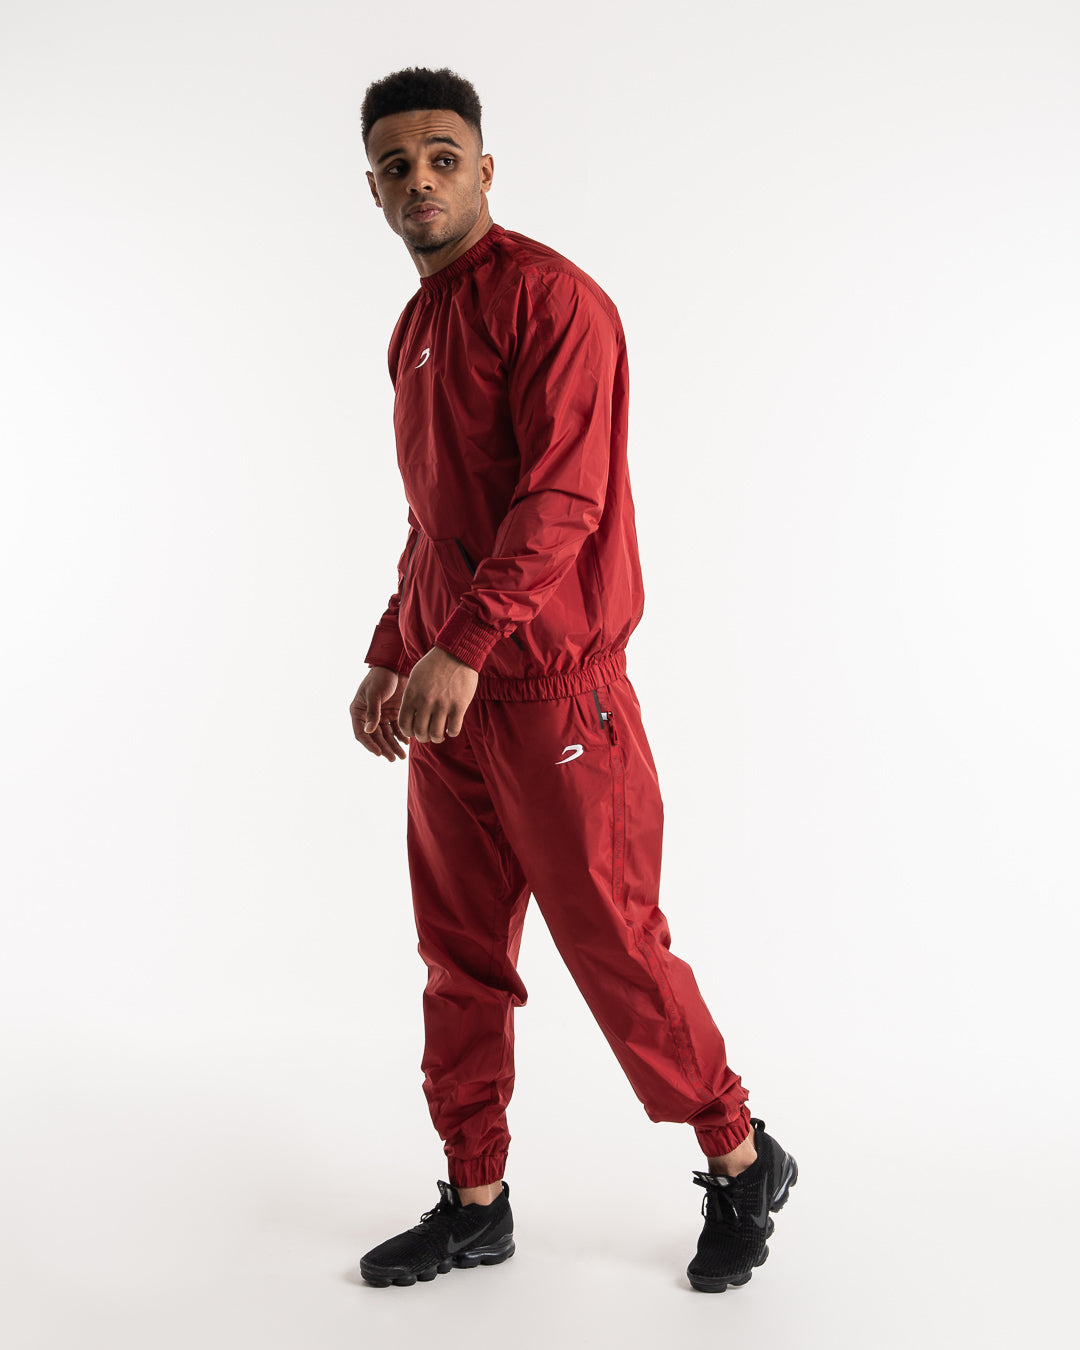 Men's Boxing Sauna Suits - Boxing Sauna Suits from BOXRAW